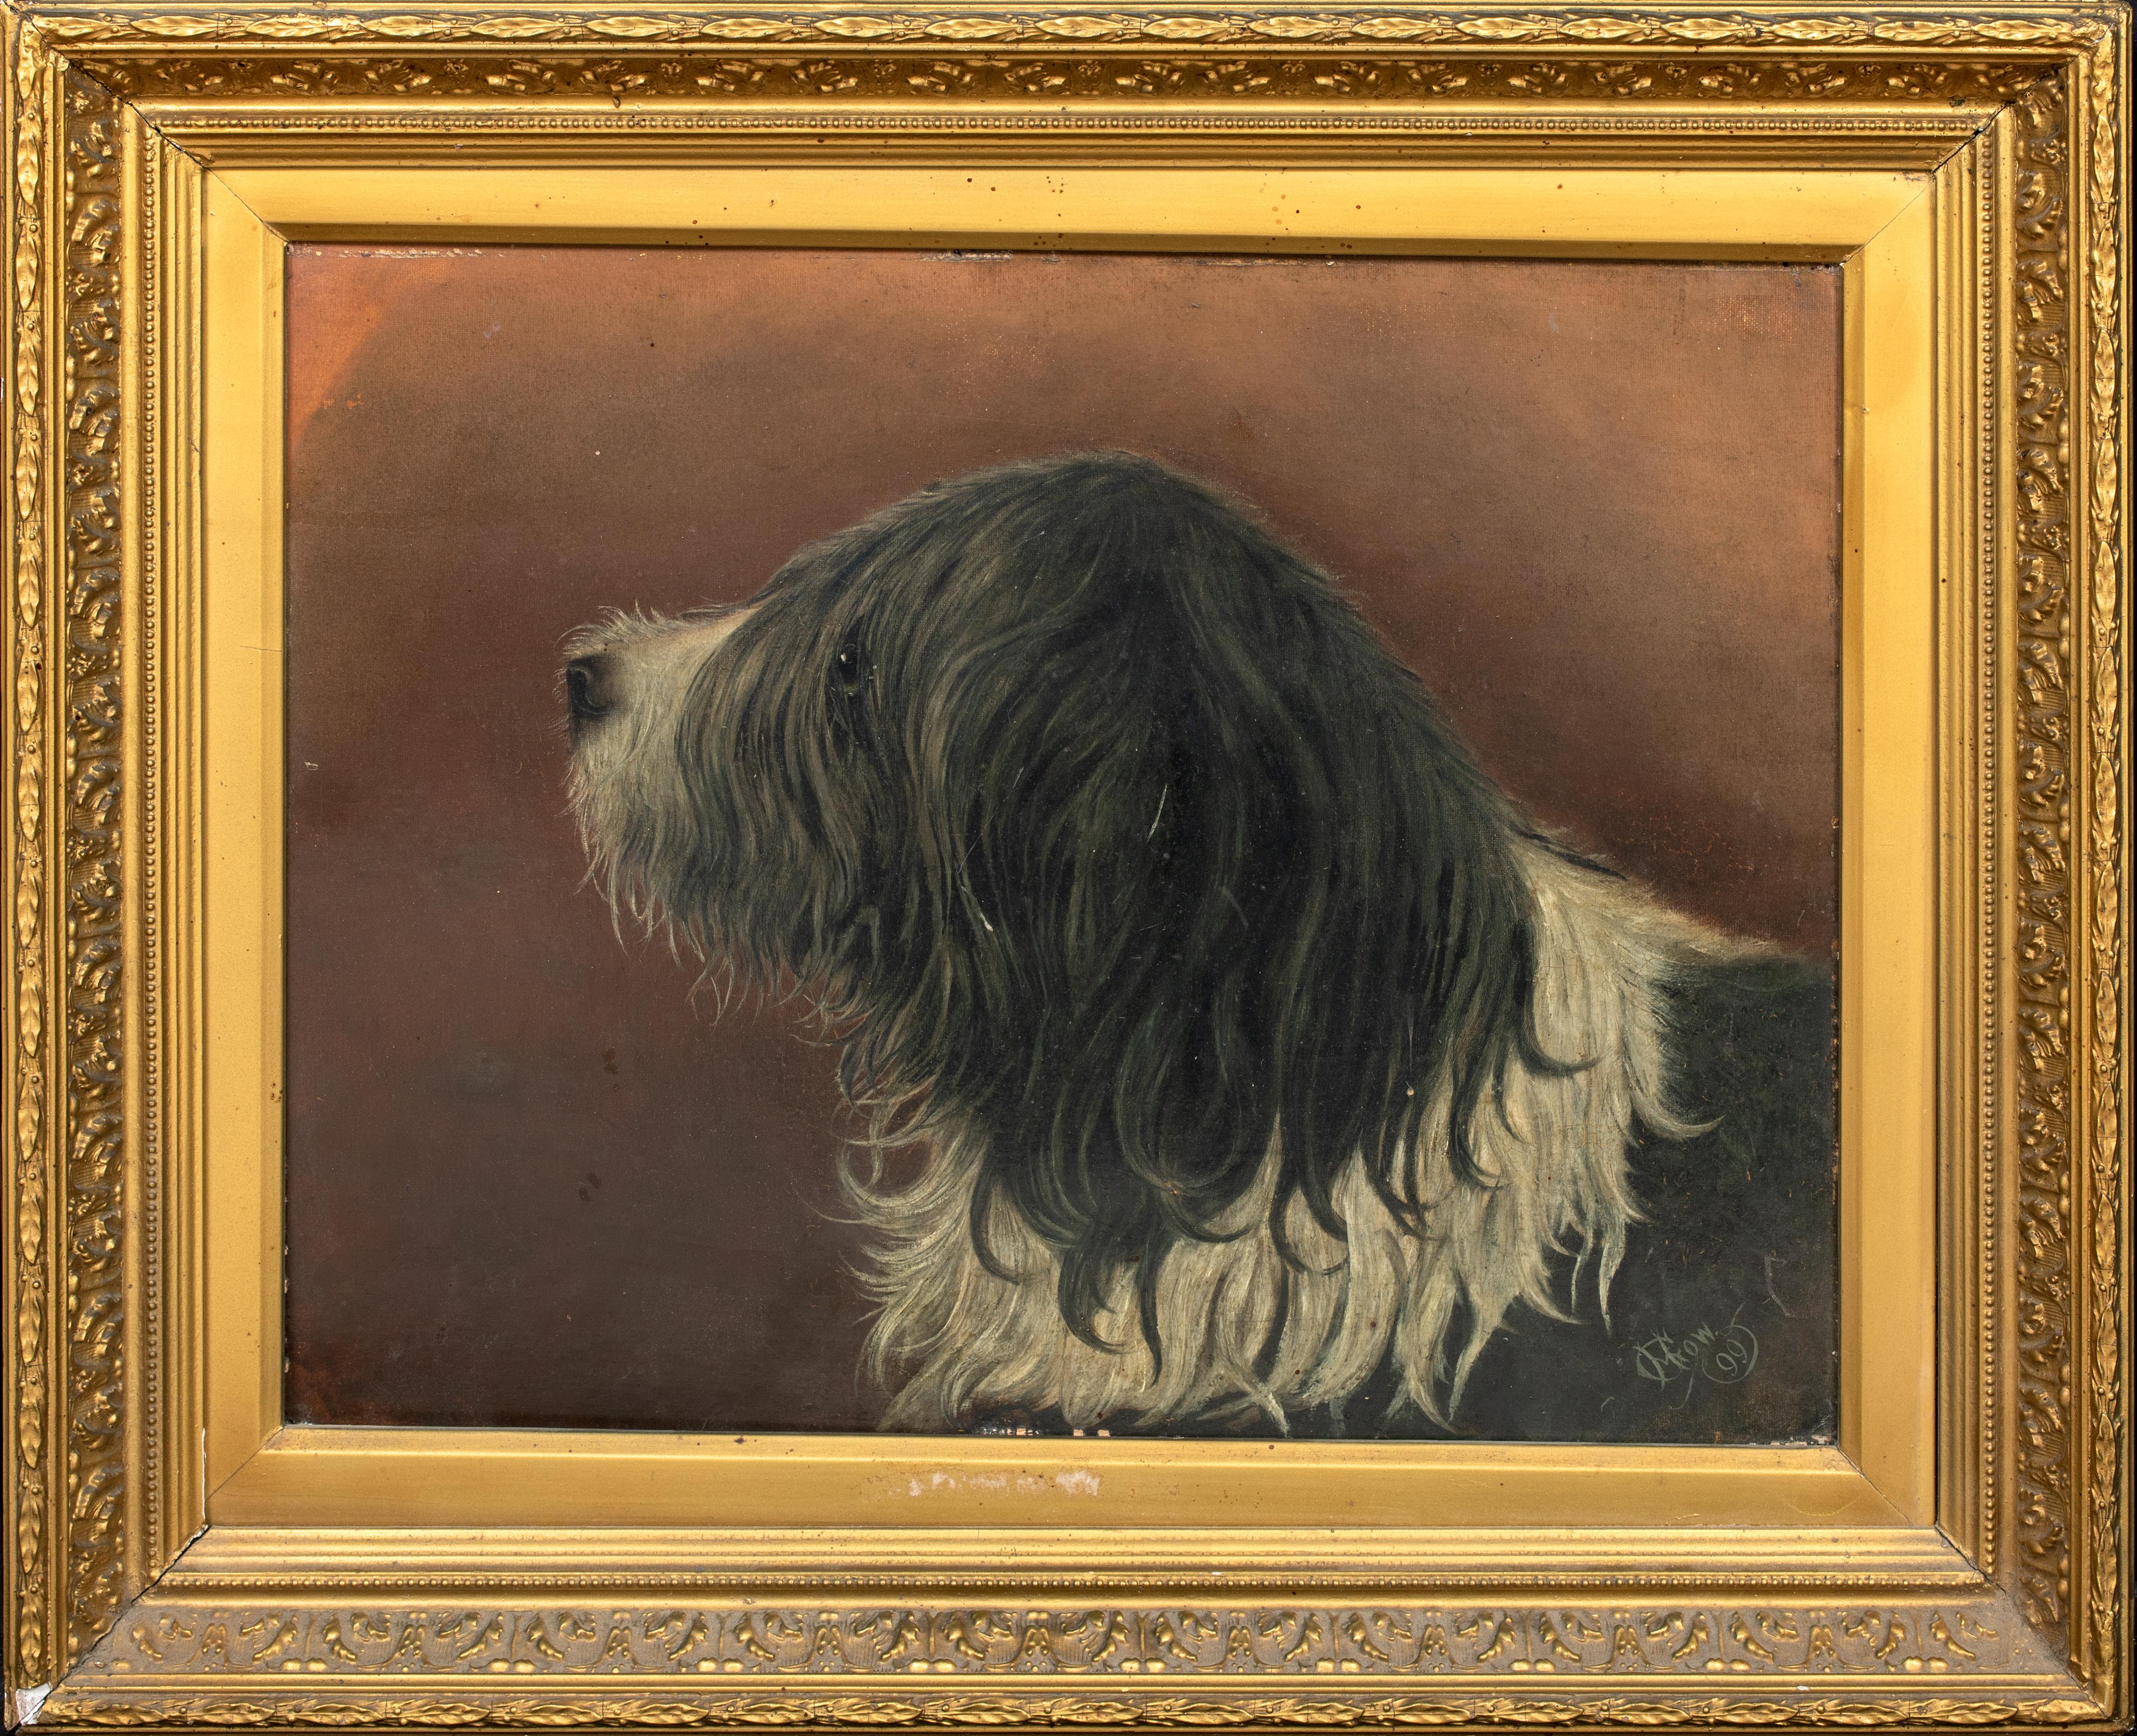 Unknown Animal Painting - Portrait "Brutus" An Old English Sheepdog, 19th Century   English School - signe